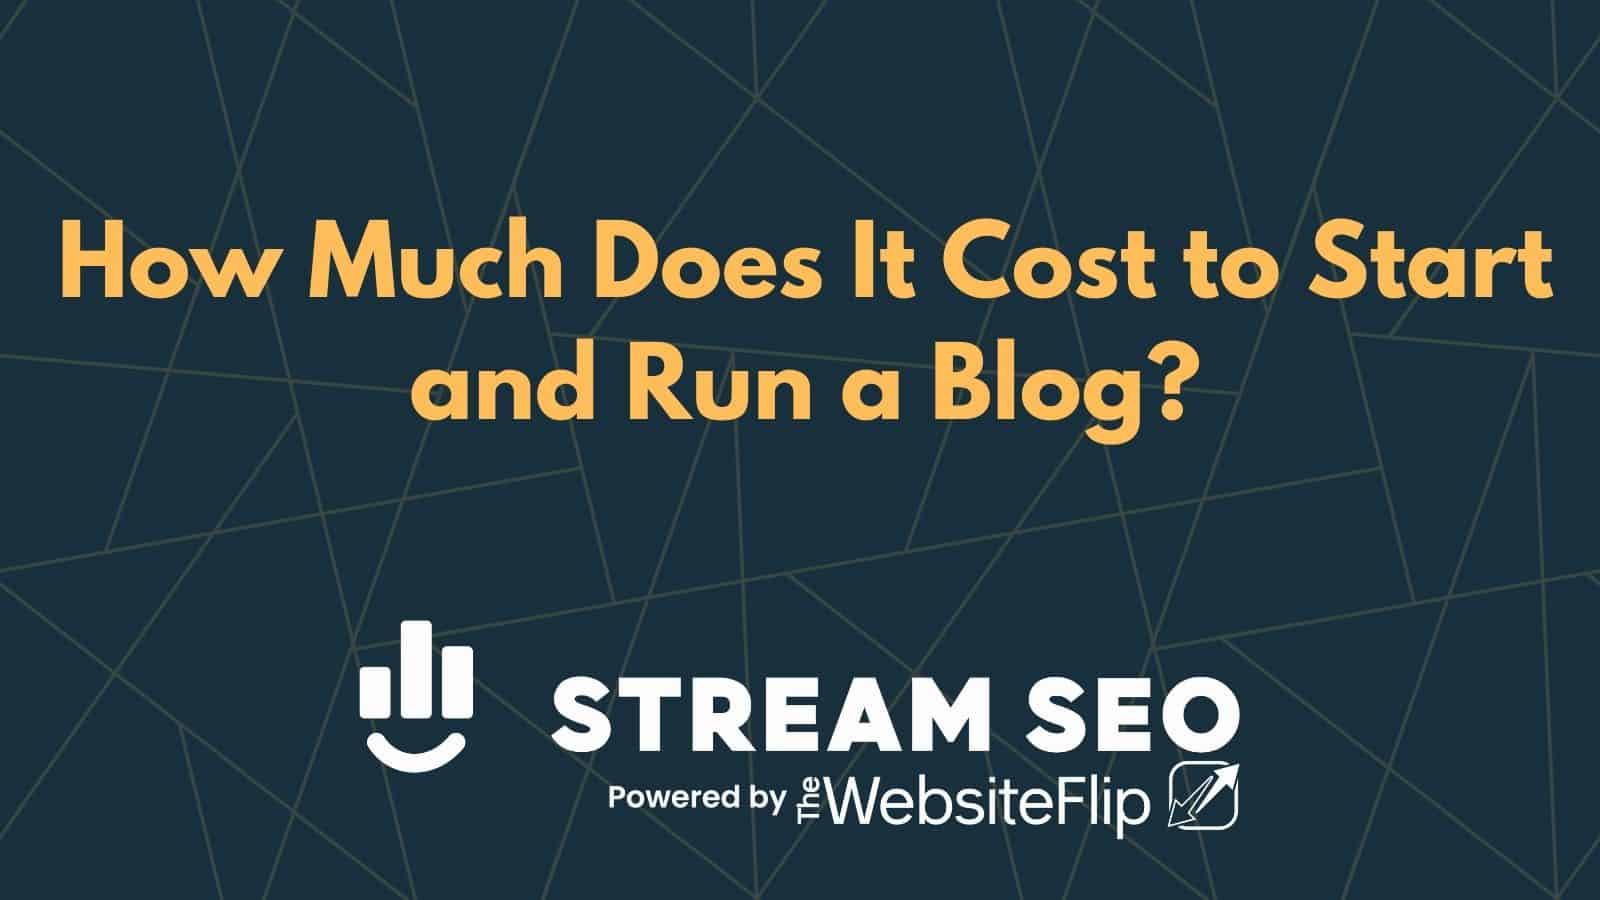 How Much Does It Cost to Start & Run A Blog?